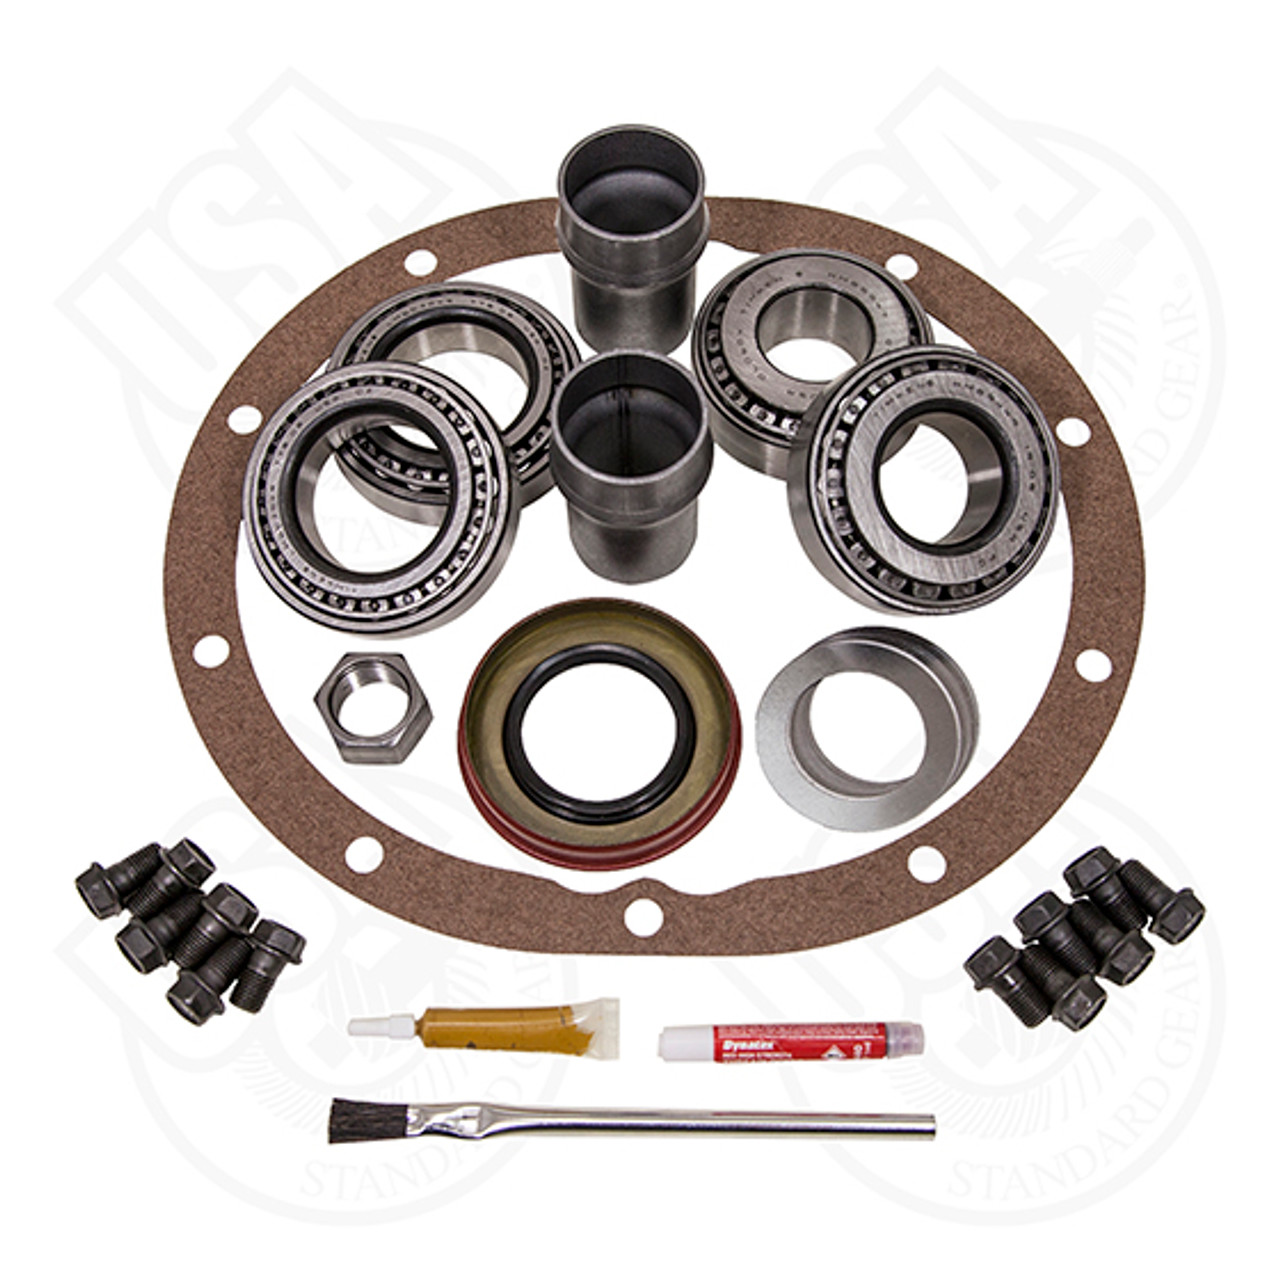 USA Standard Master Overhaul kit for GM Chevy 55P and 55T differential